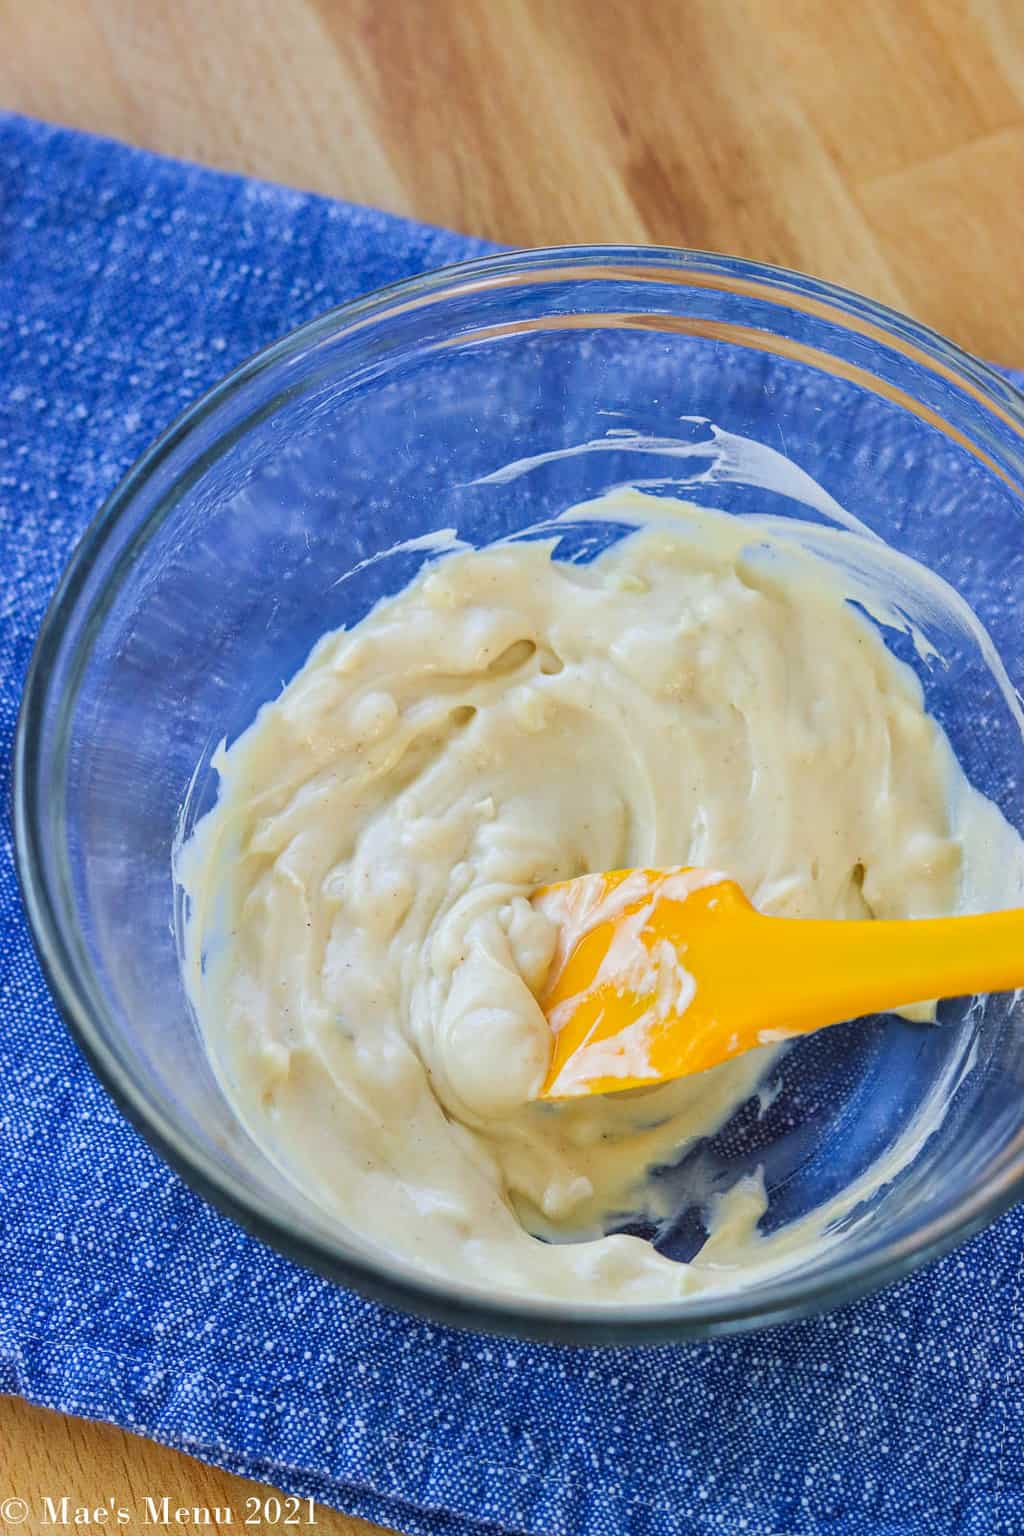 The mayonnaise mixture whisked up